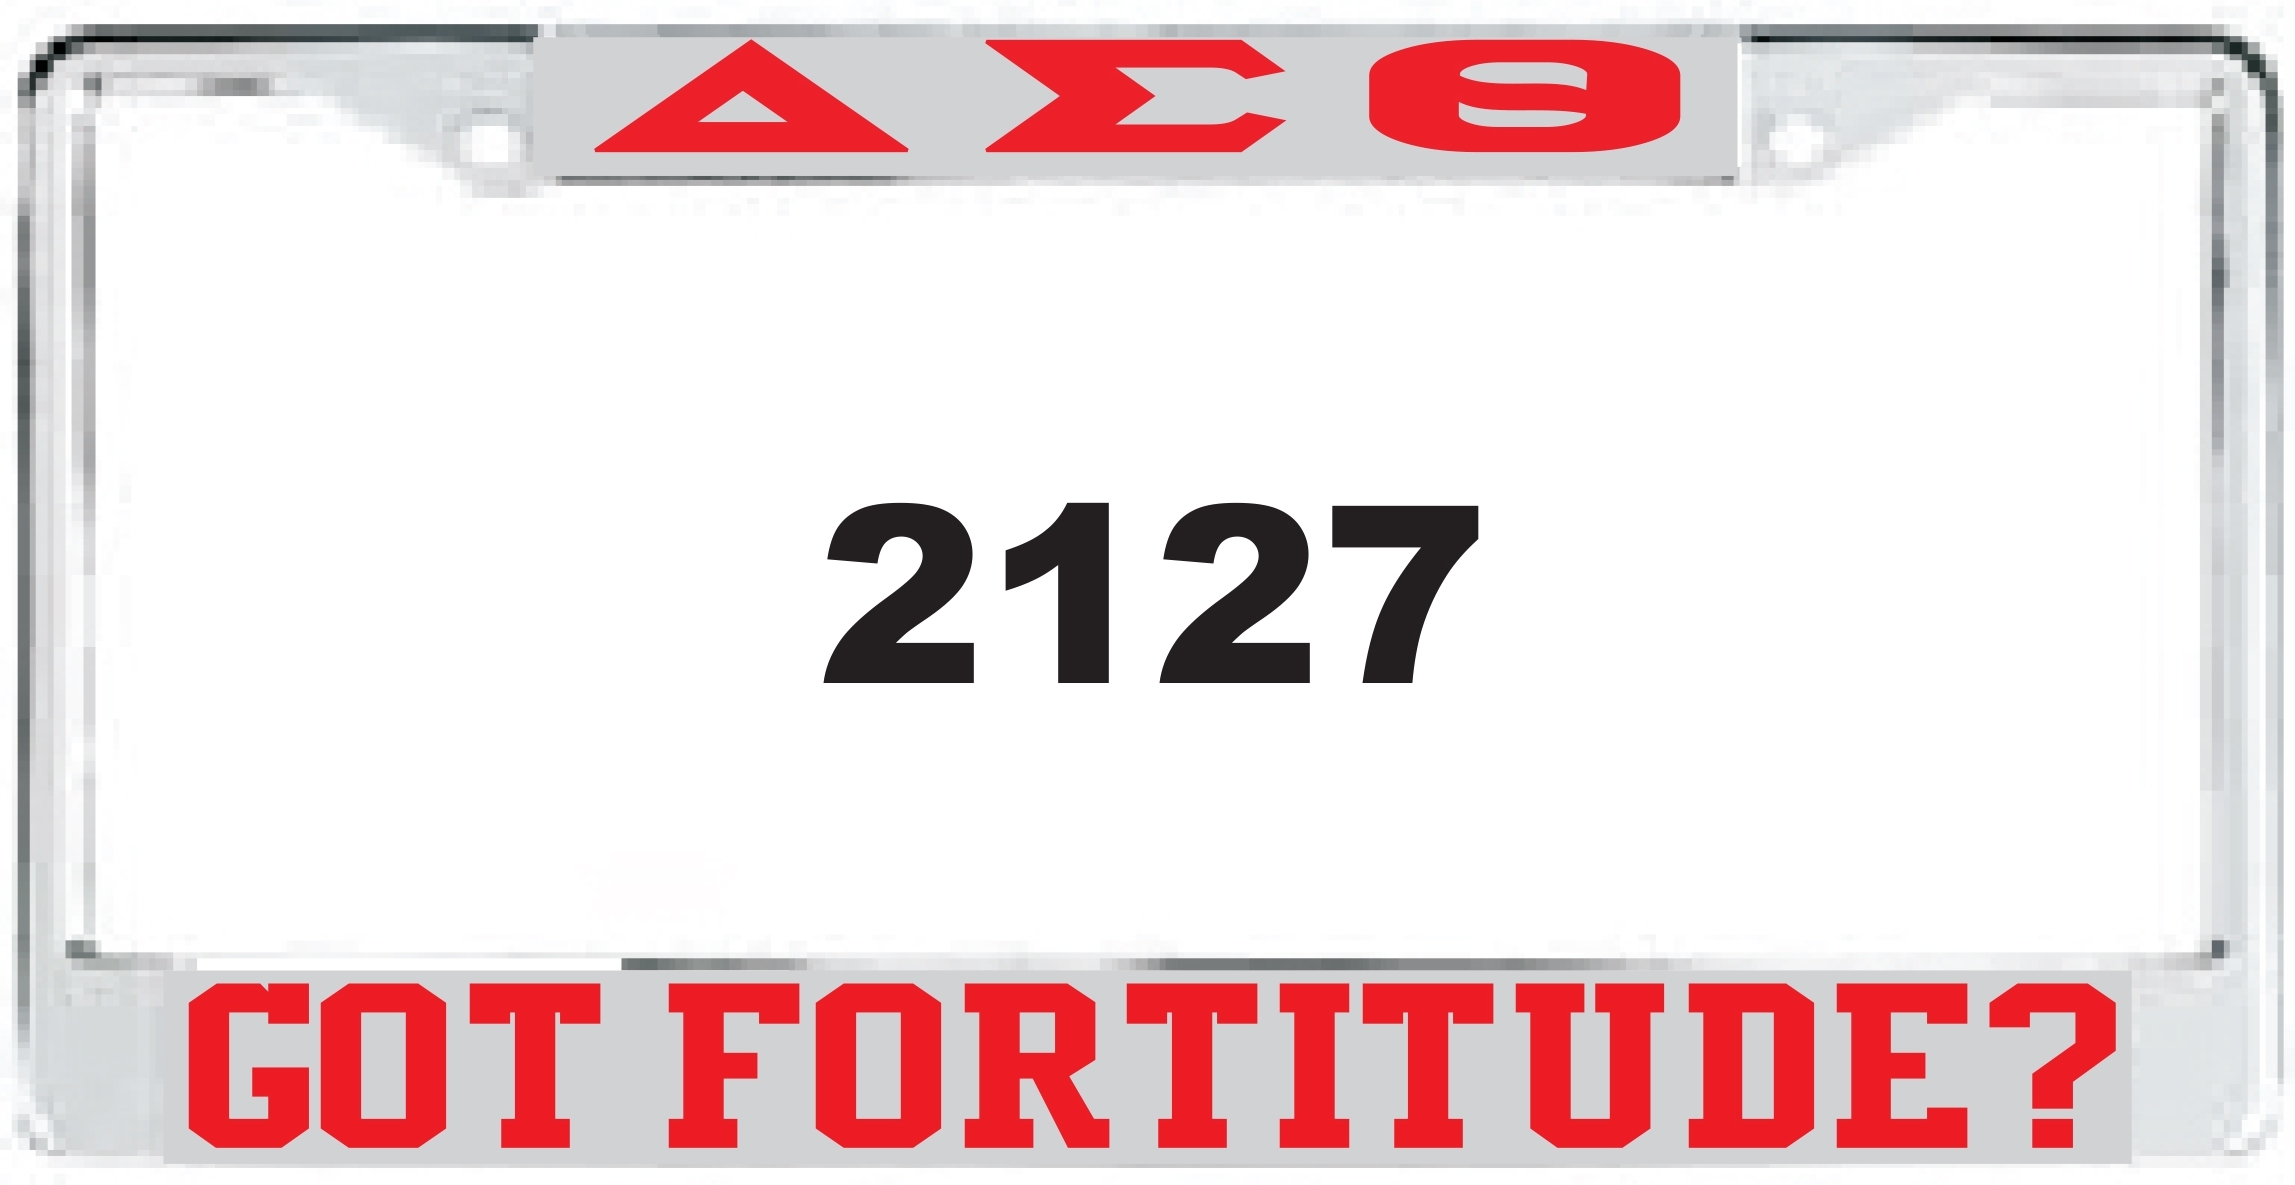 Line Number License Plate #2 Delta Sigma Theta